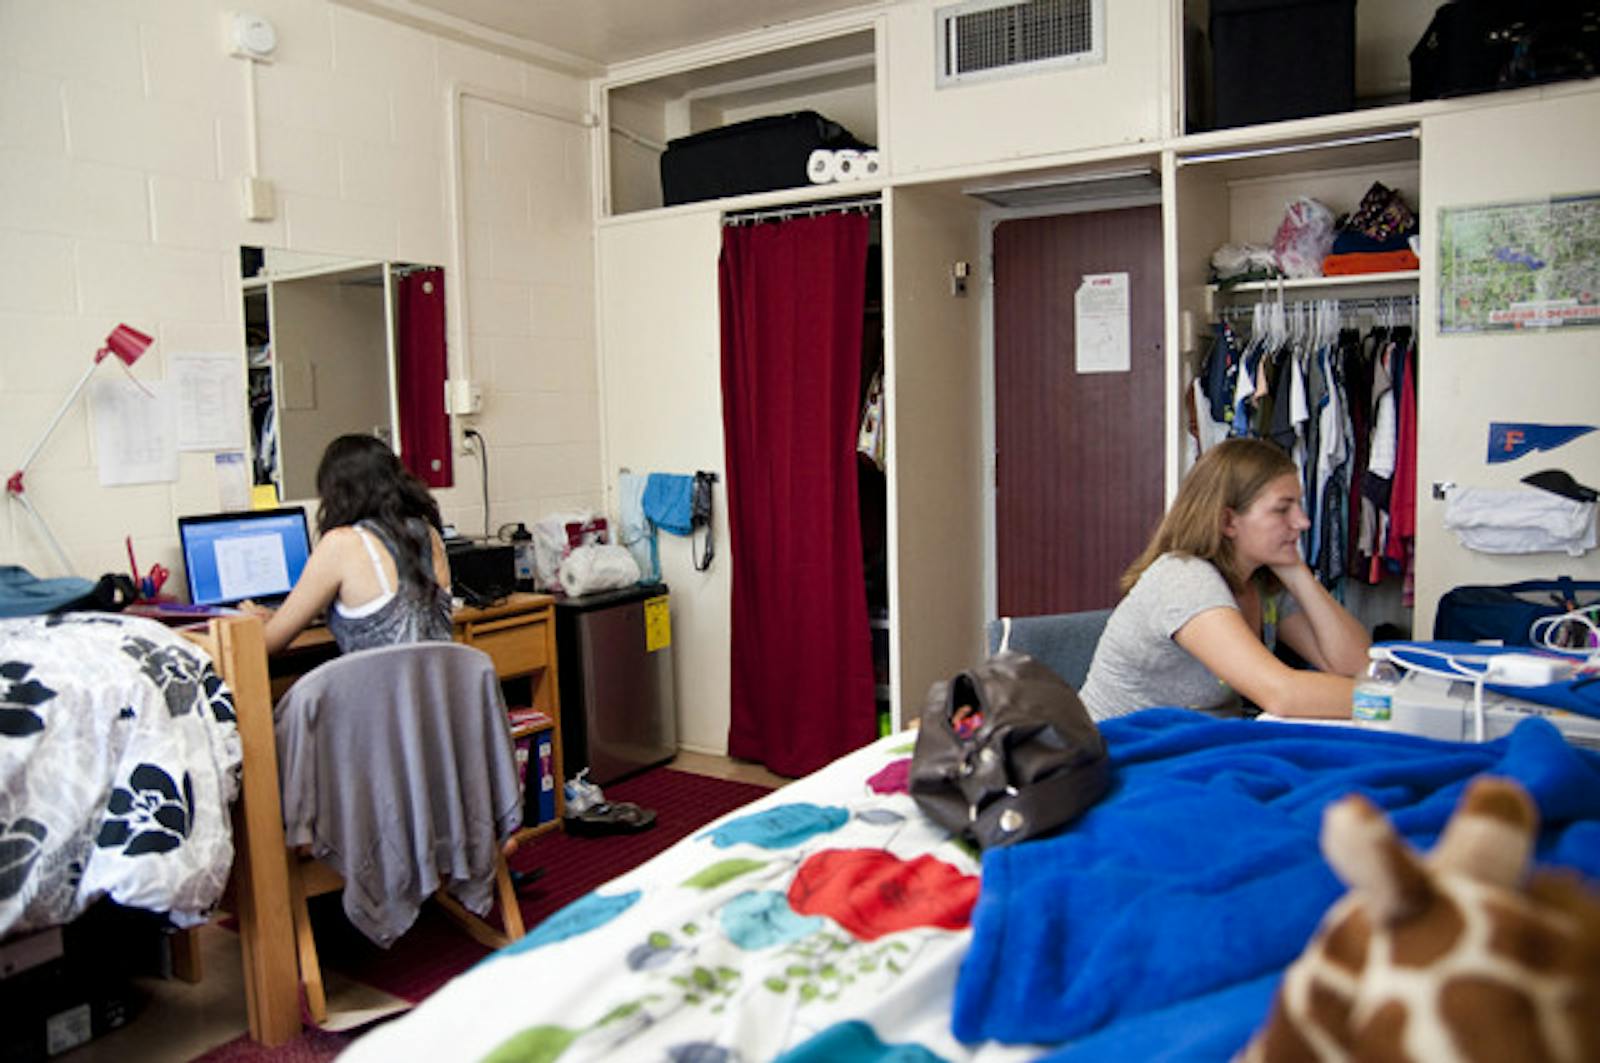 UF cancels Summer housing contracts, some The